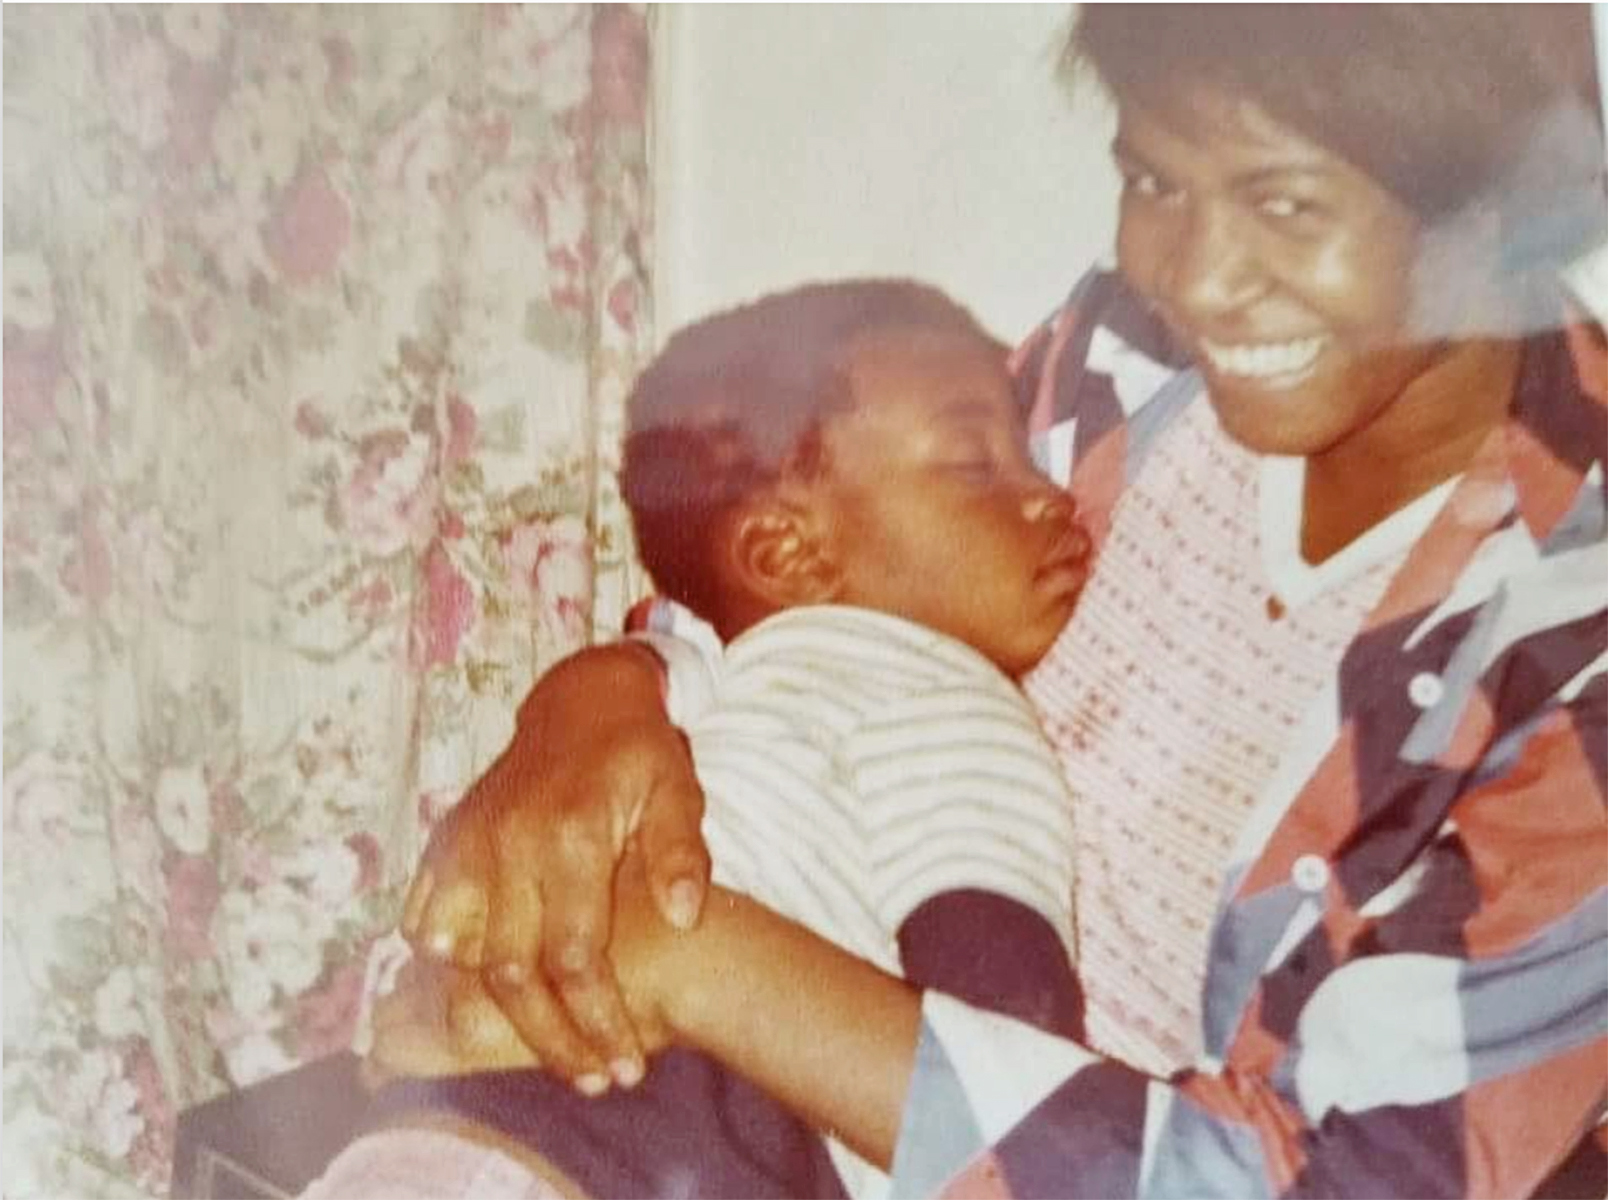 A young George Floyd with his mother Larcenia Floyd (Ben Crump Law Firm)